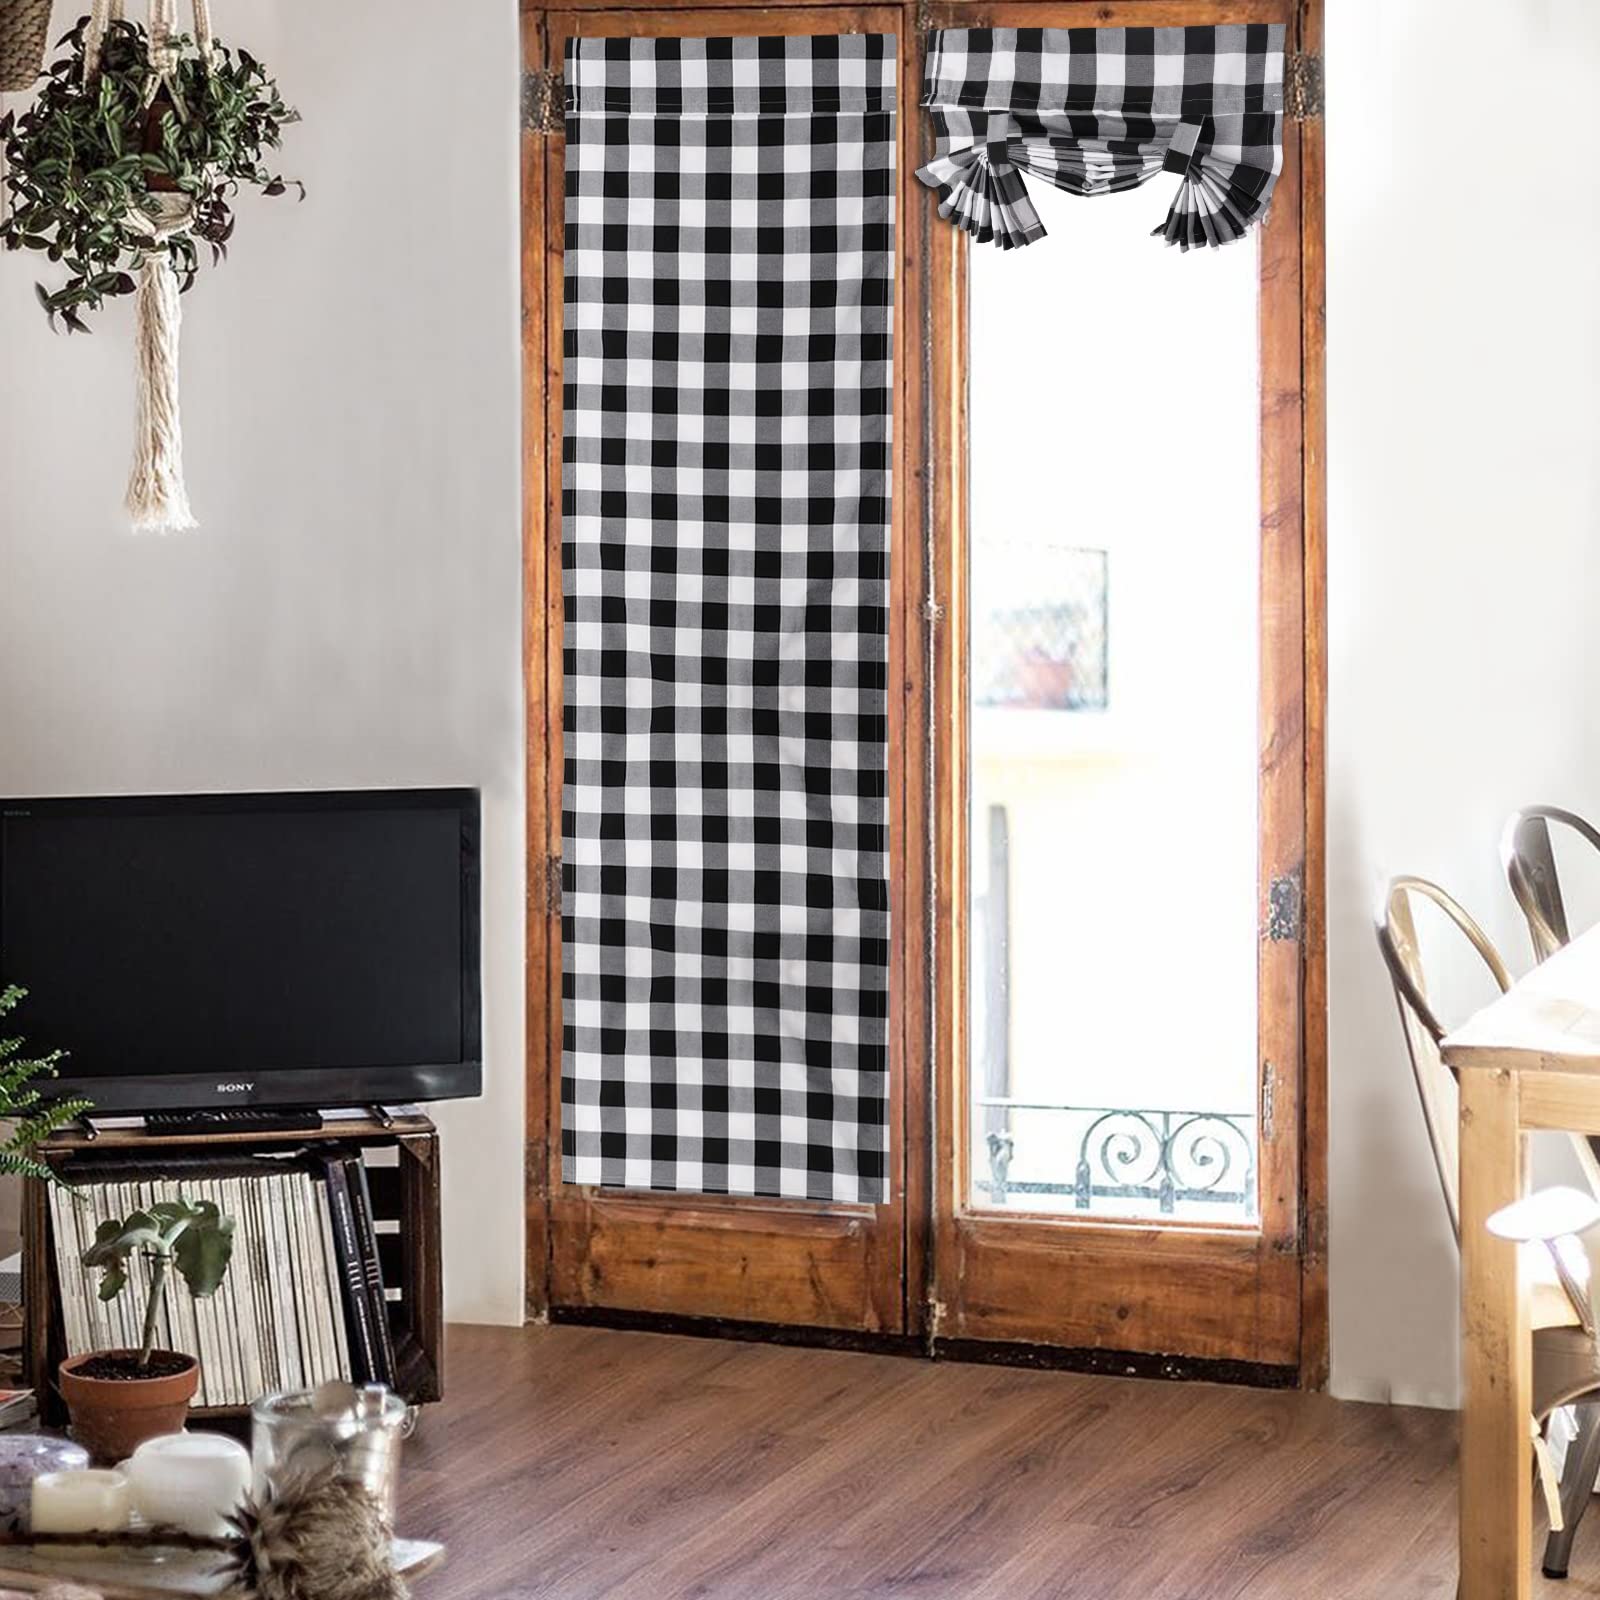 EEYE French Door Curtains Buffalo Plaid Door Curtain Panel Thermal Insulated Tie Up Shades with Sticky Strap Light Filtering Temporary Window Treatment for Tricia Window, 25” x 72”,Black